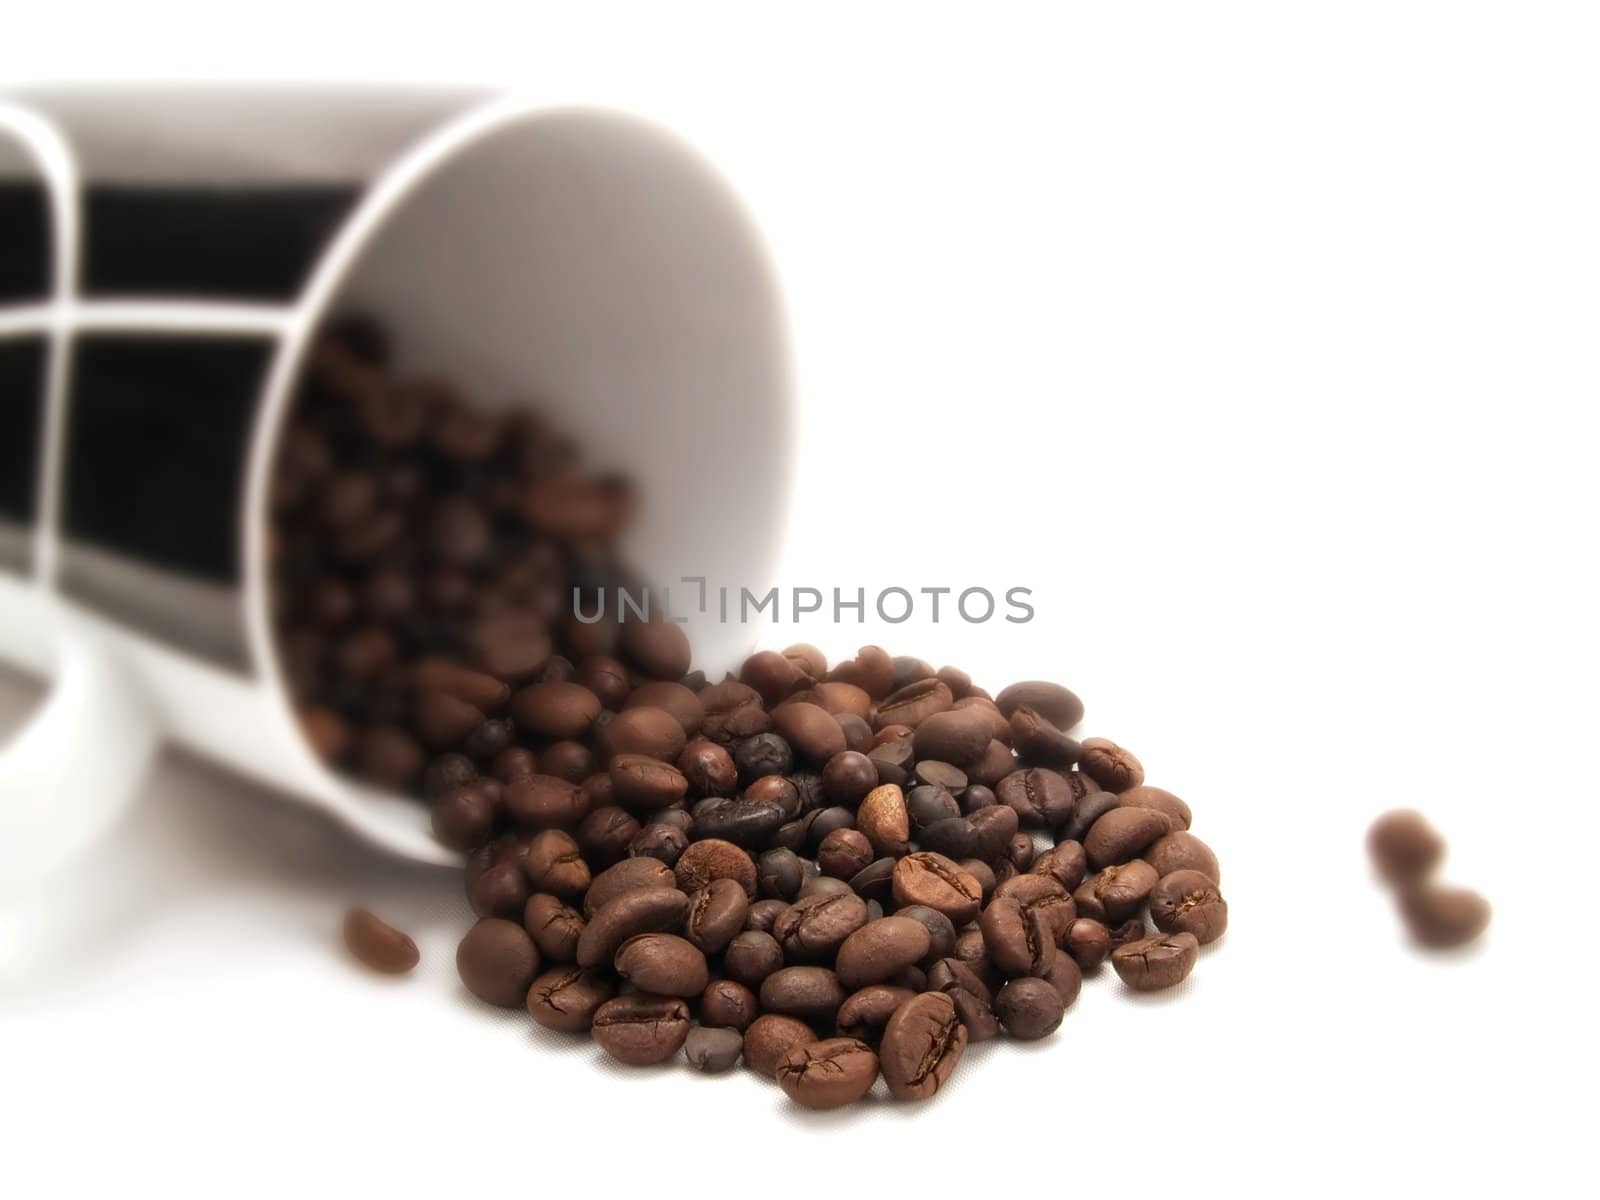 Coffee beans in a white cup